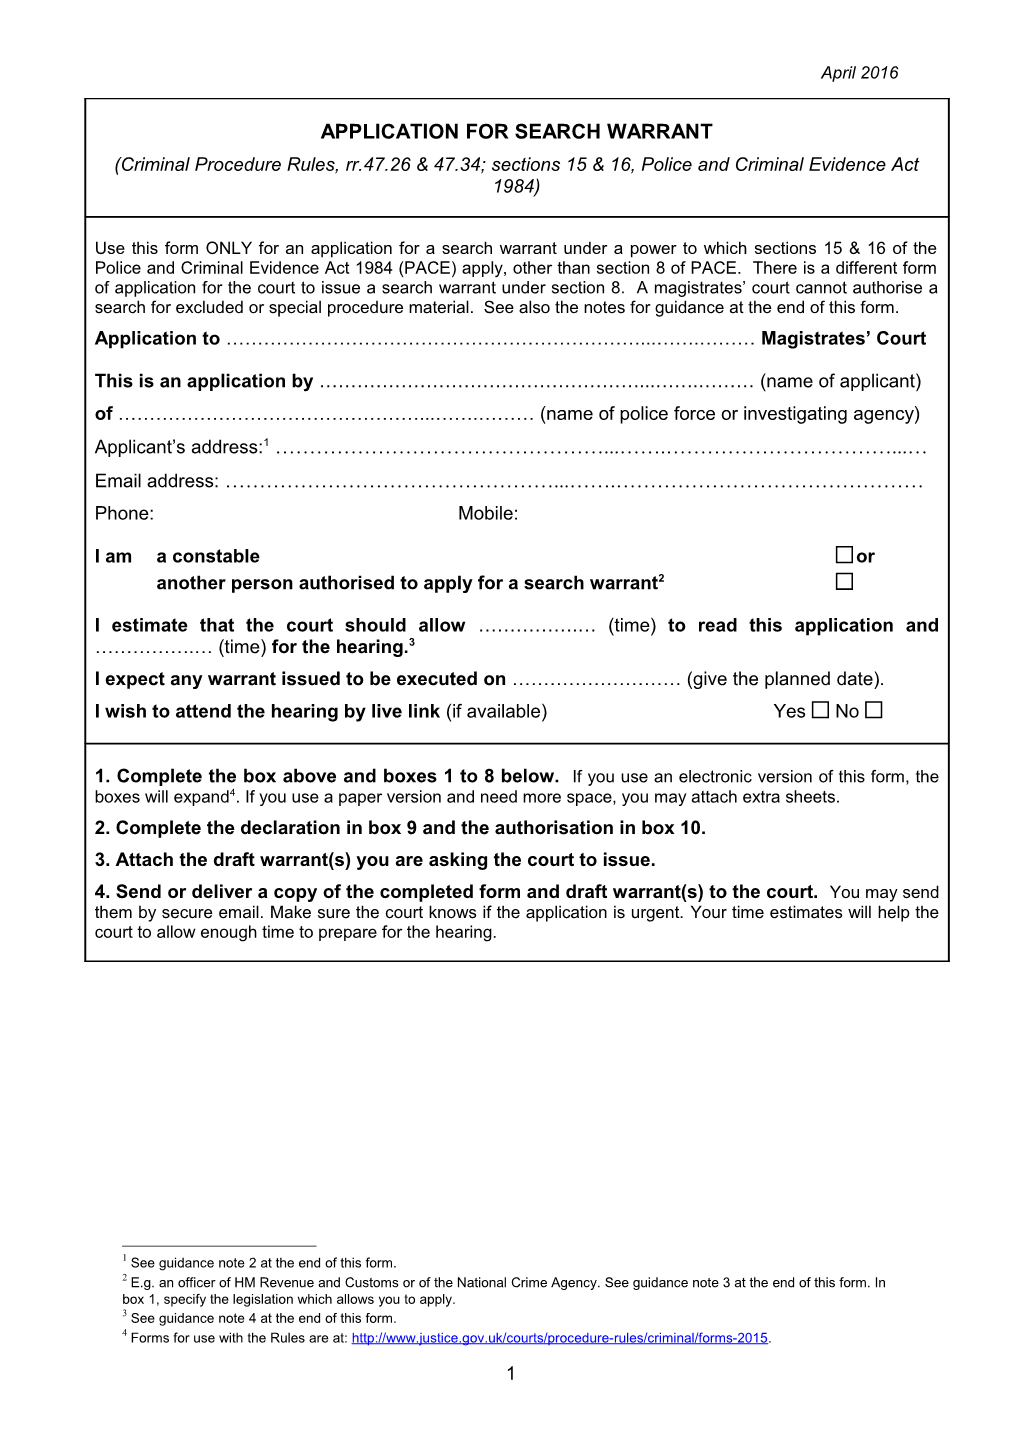 Application for Search Warrant